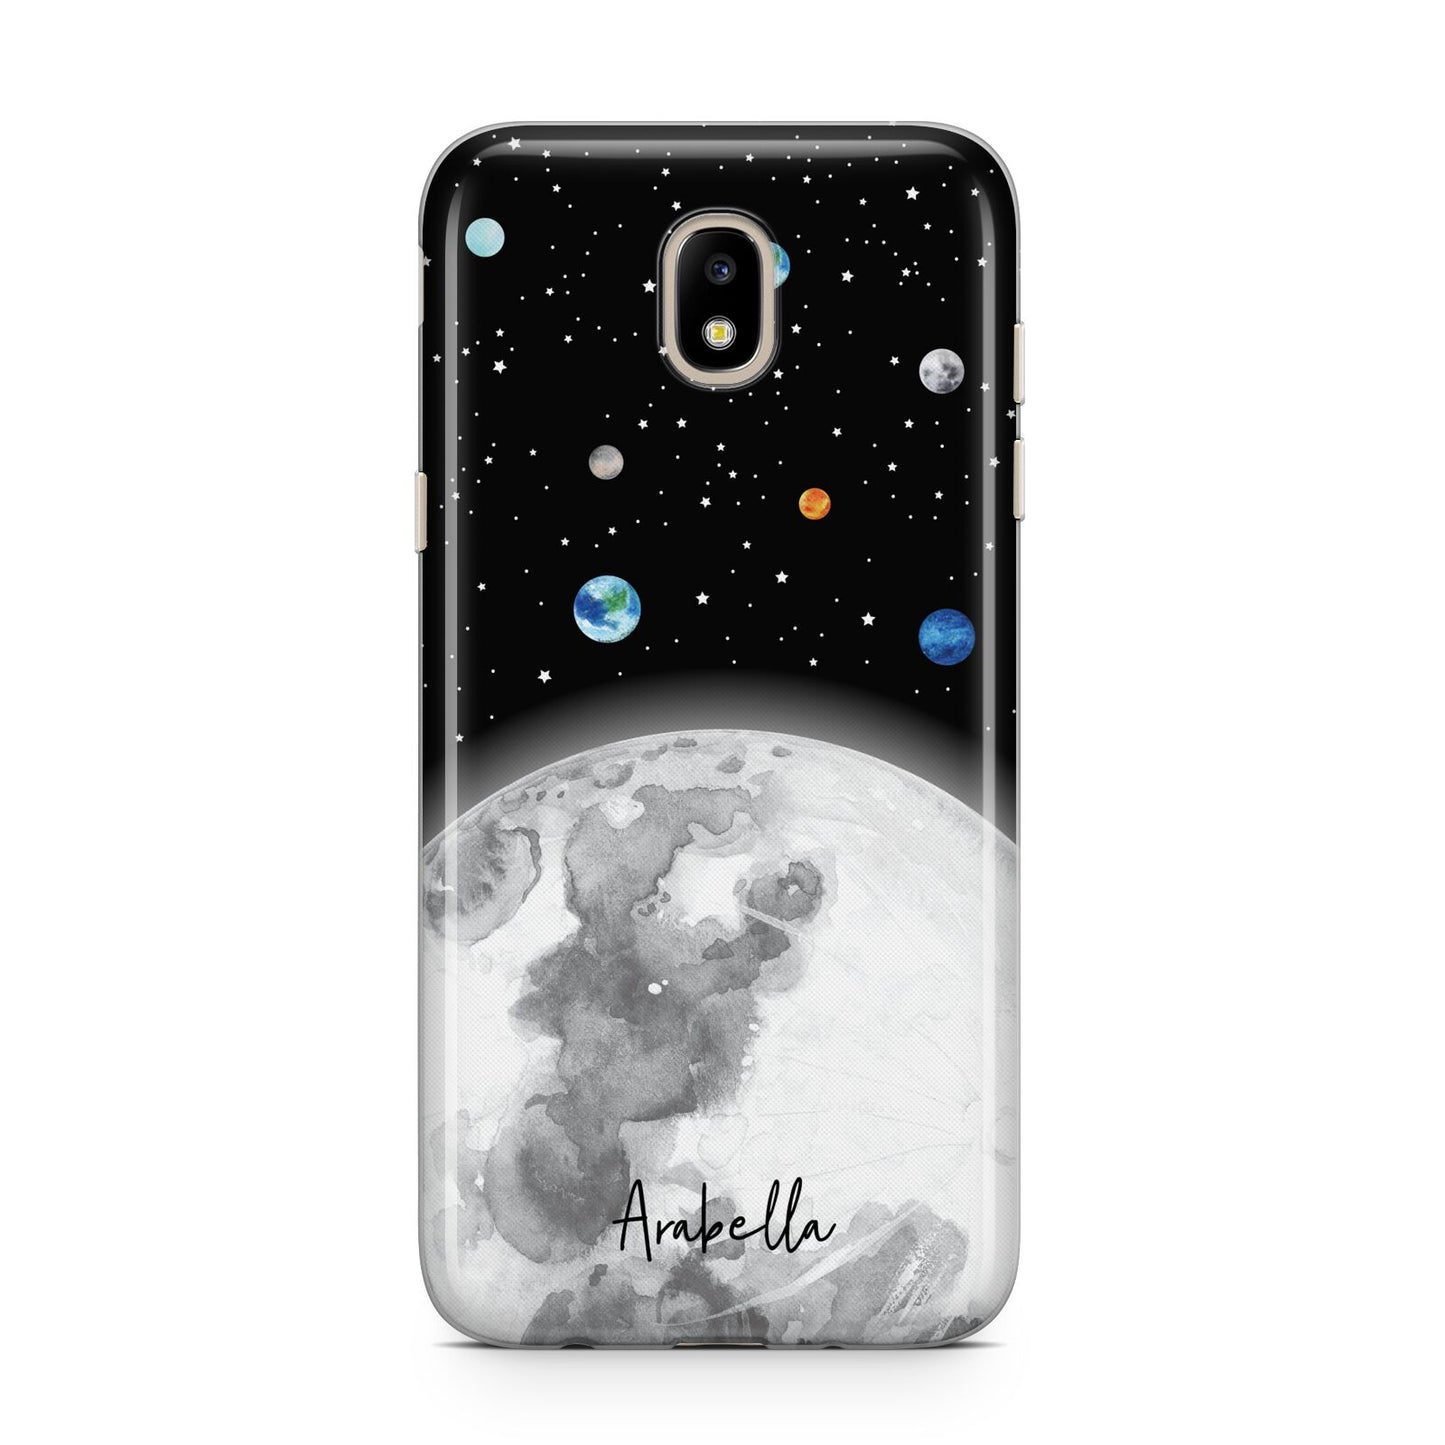 Watercolour Close up Moon with Name Samsung J5 2017 Case